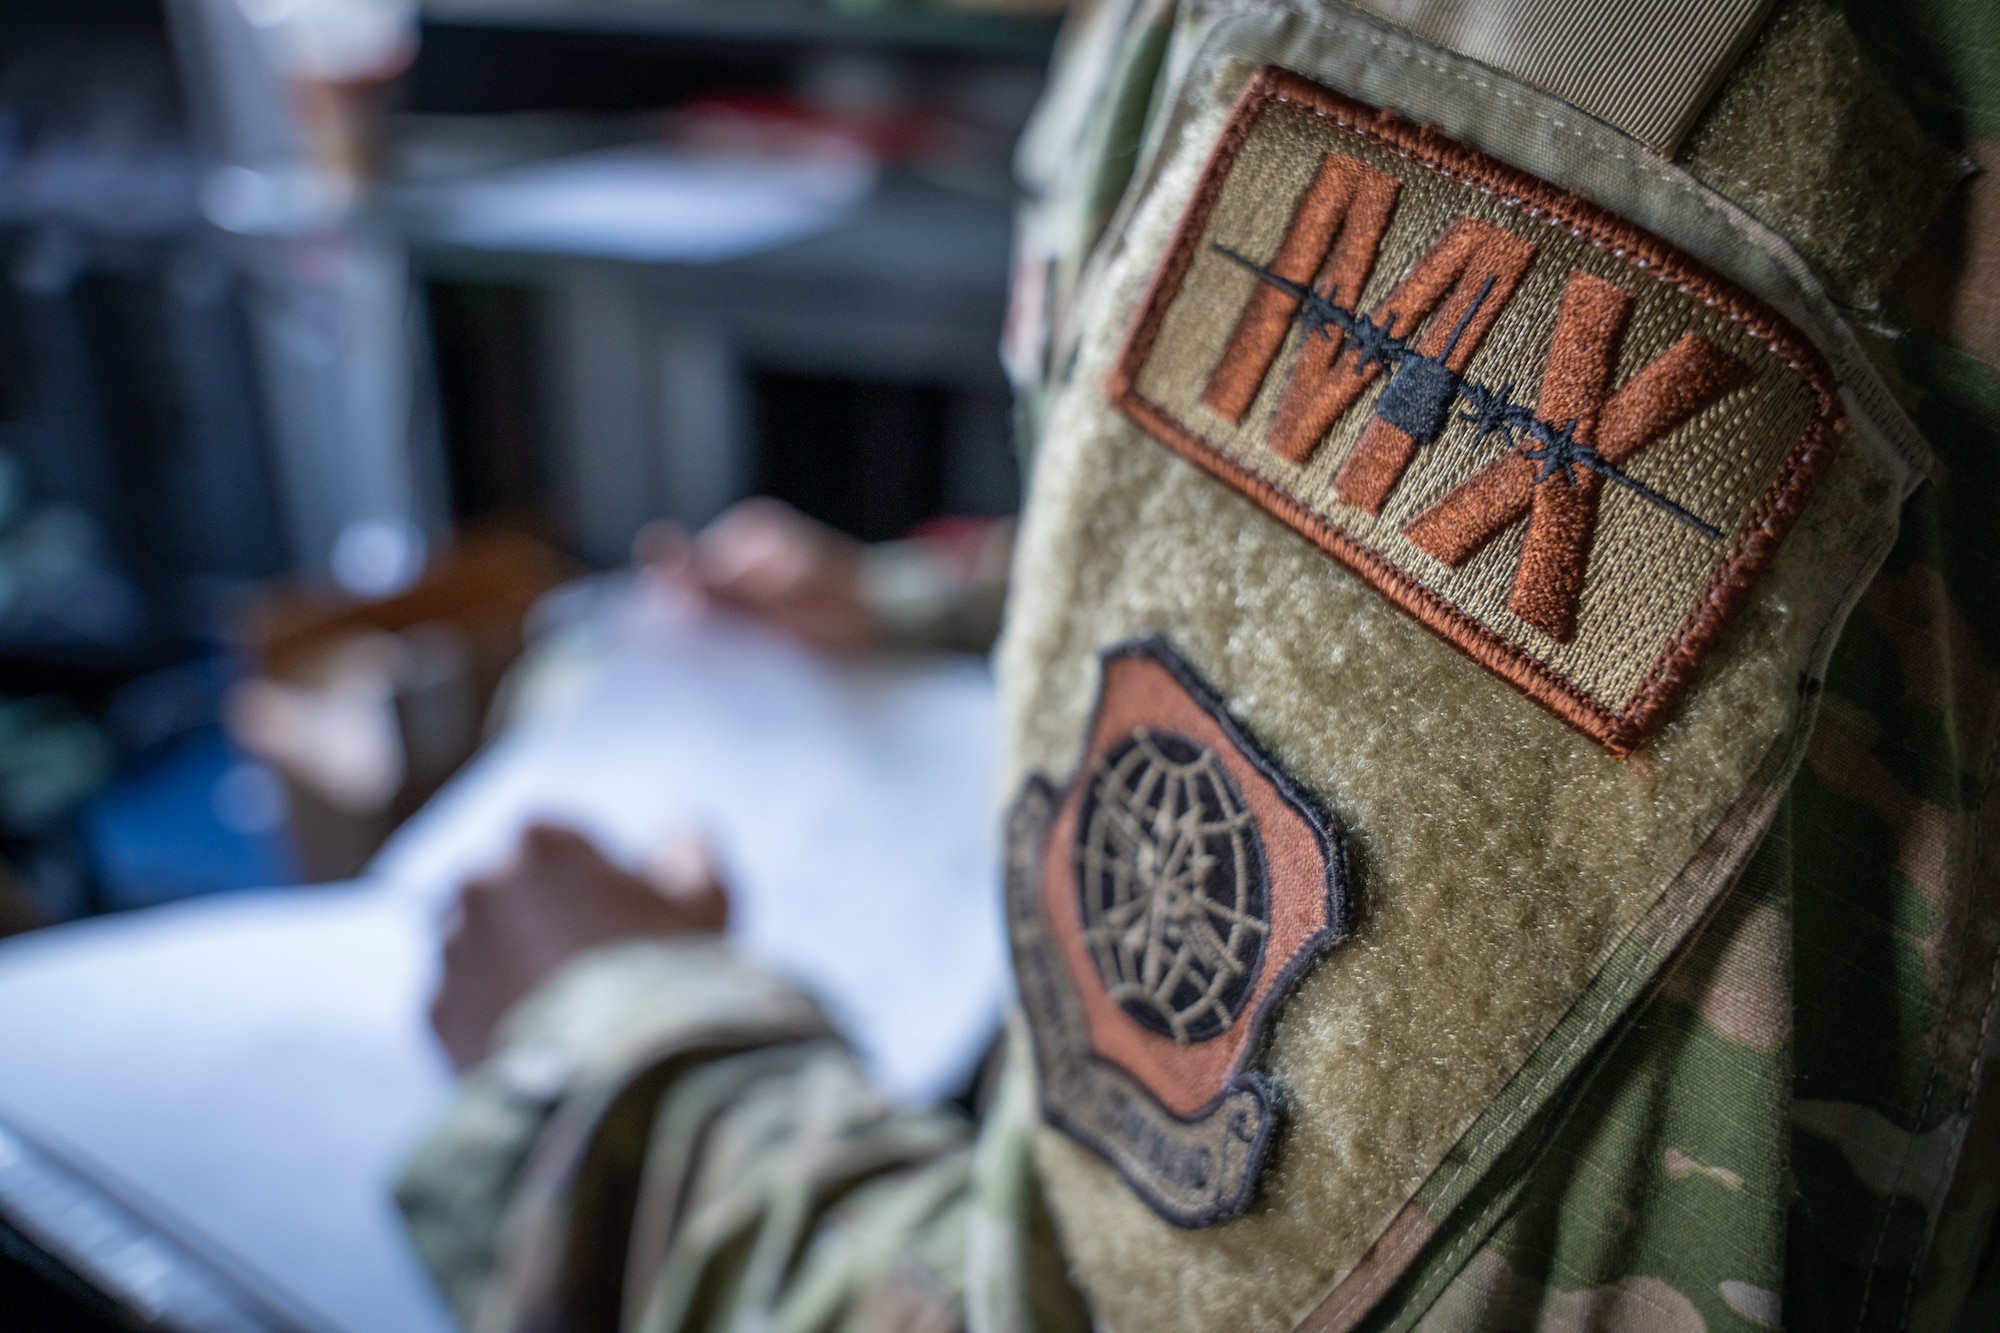 A C-130J Super Hercules maintenance patch from the 39th Airlift Squadron patch sits on a uniform at the Santiago de Chile Airport, Santiago, Chile, July 28, 2023, during exercise Southern Star 23. Exercise Southern Star 23 is a Chilean-led full-scale Special Operations, Joint, and Combined Employment Exercise. The training consists of staff planning, tactical maneuvers, and collaboration among SOUTHCOM components’ staff, Chilean Armed Forces, and interagency partners during a stabilization scenario which facilitates the opportunity for participants to execute and assess the staff’s ability to plan, coordinate and execute command and control, logistical support, and decision-making processes in a crisis scenario. (U.S. Air Force photo by Staff Sgt. Clayton Wear)